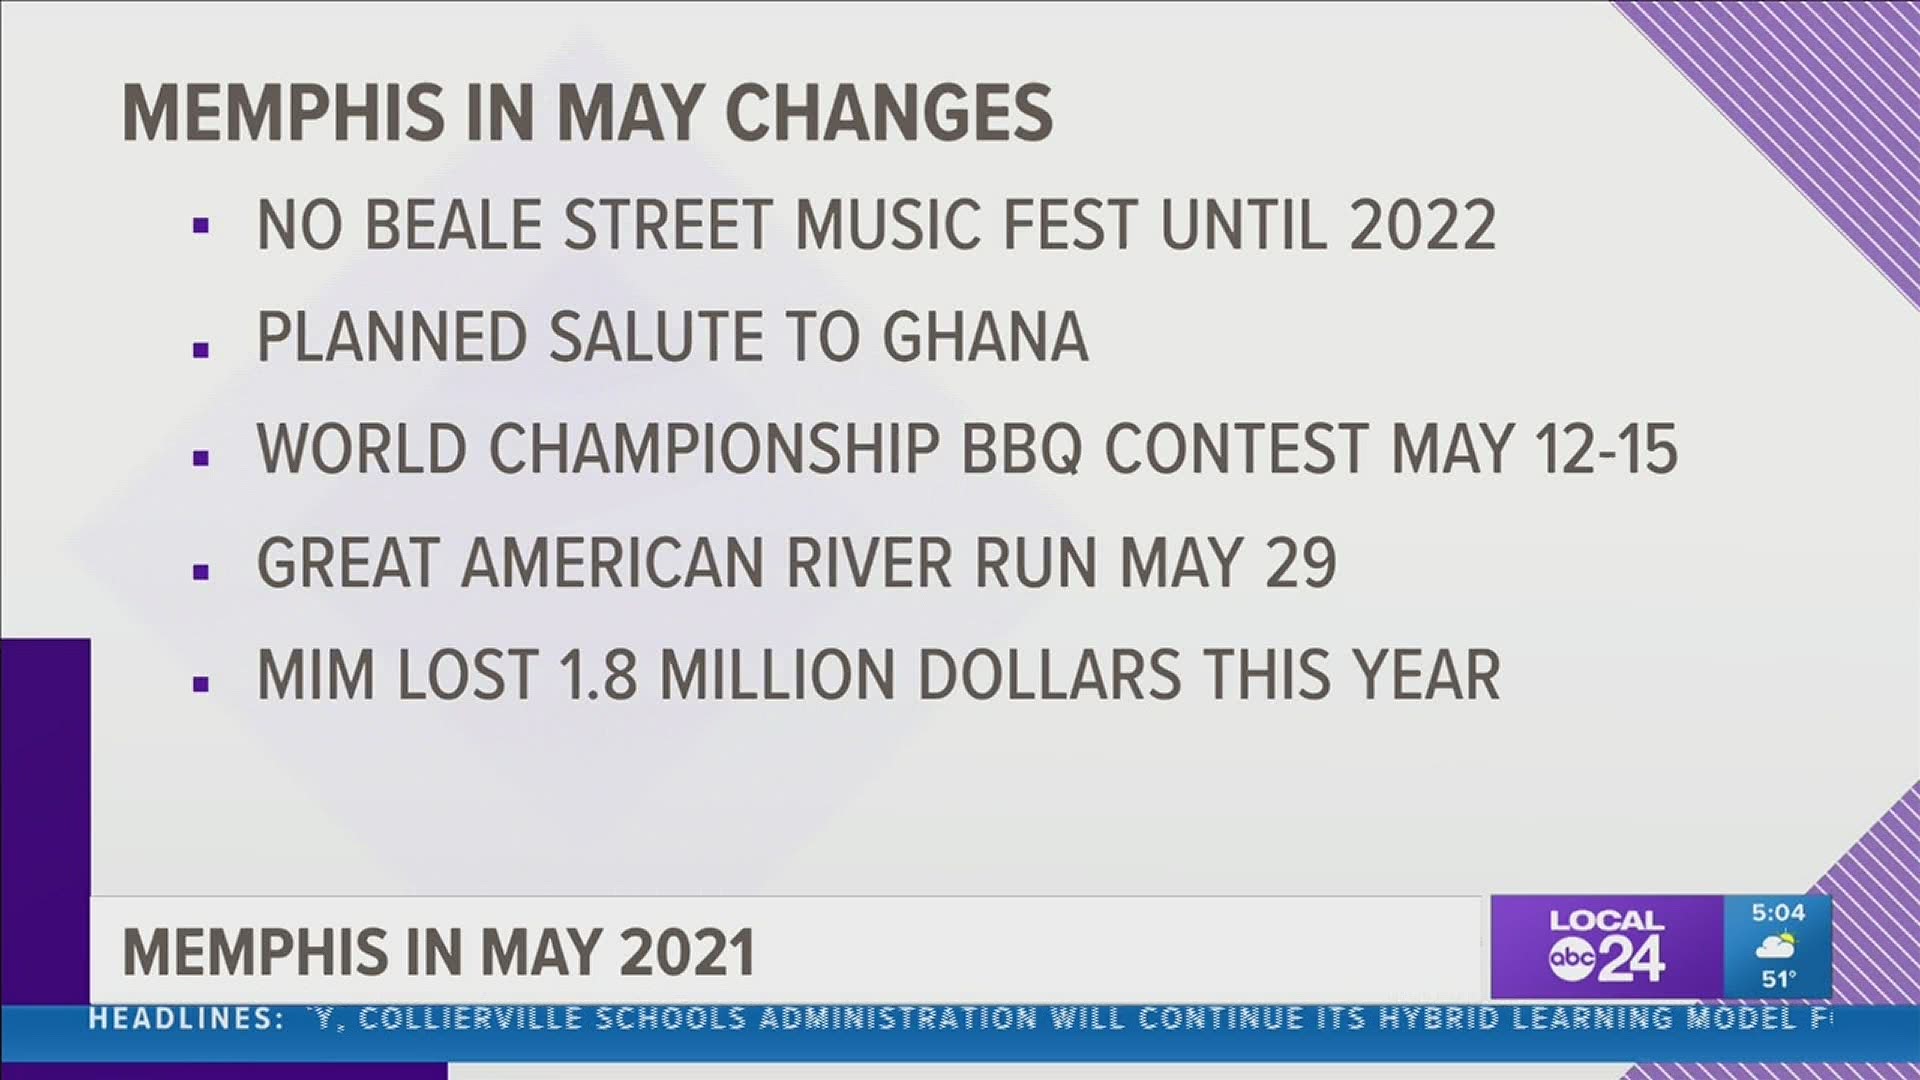 Due to the continuing threat of COVID 19, adjustments have been made to the 2021 Memphis in May event calendar. The music festival is moved to 2022.